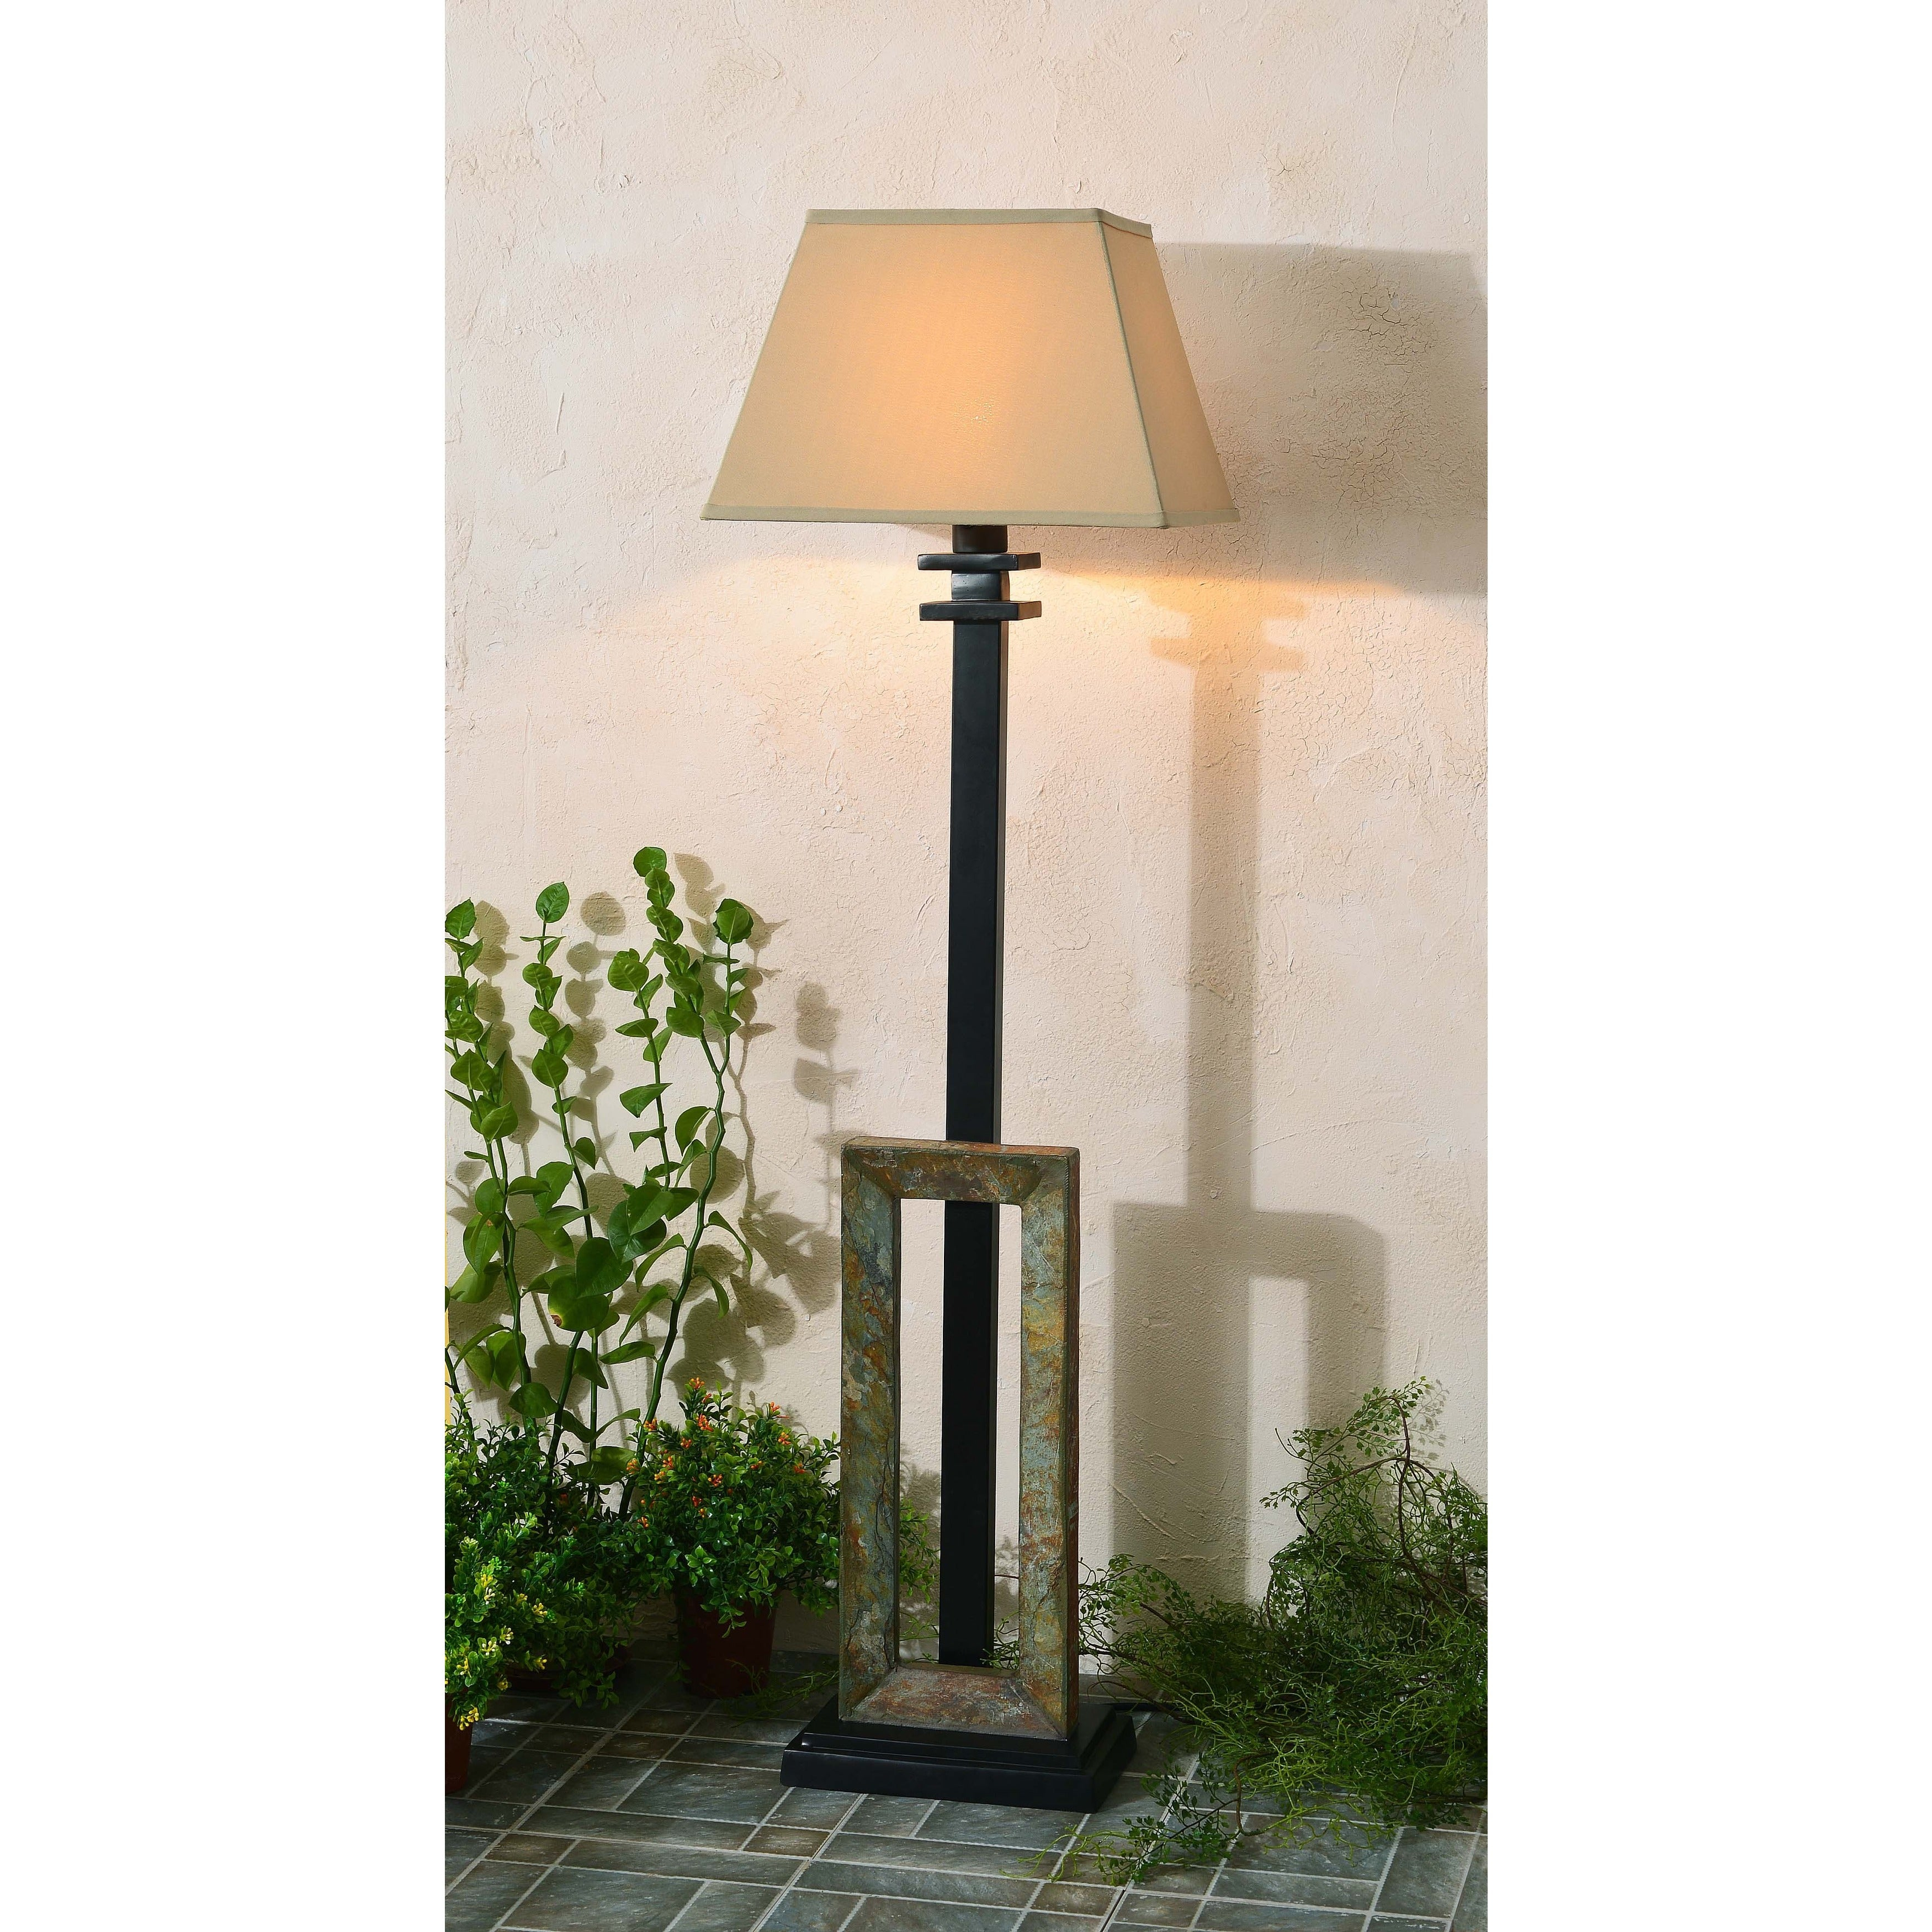 Stronach Natural Slate 60 Inch Outdoor Floor Lamp in size 3500 X 3500